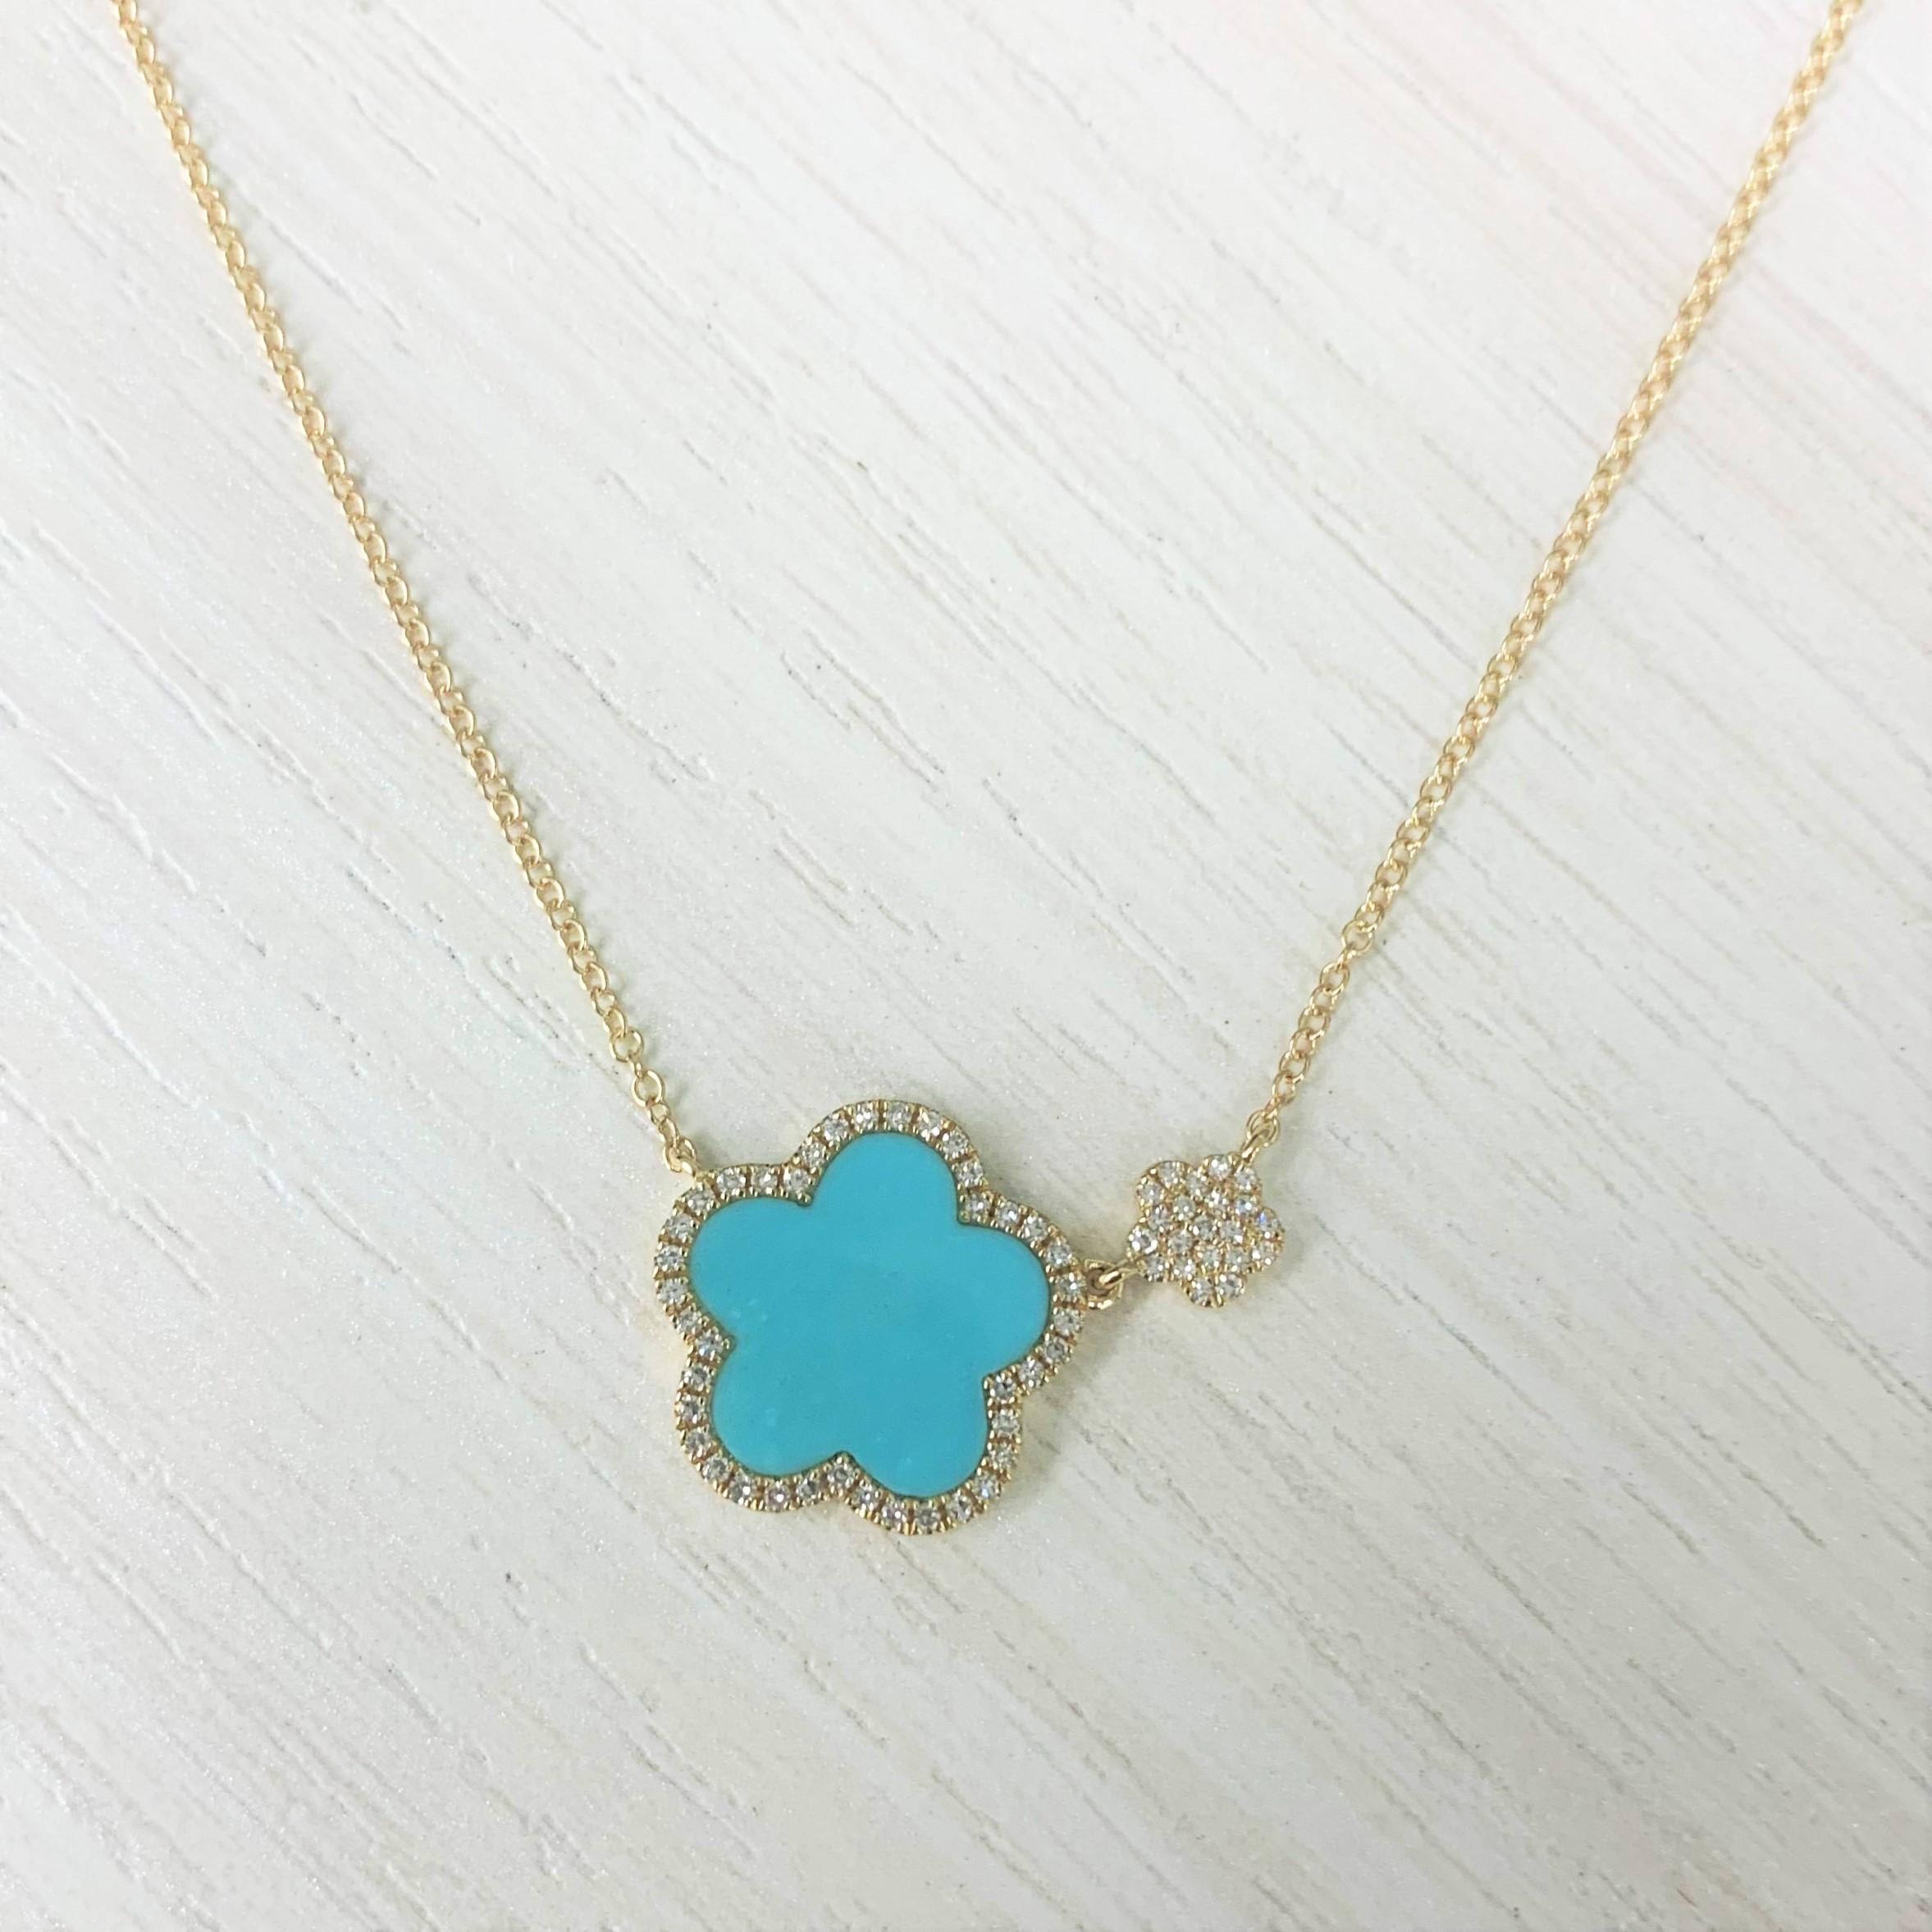 14 Karat Yellow Gold 0.17 Carat Diamond & Turquoise Flower Pendant Necklace In New Condition For Sale In Great neck, NY